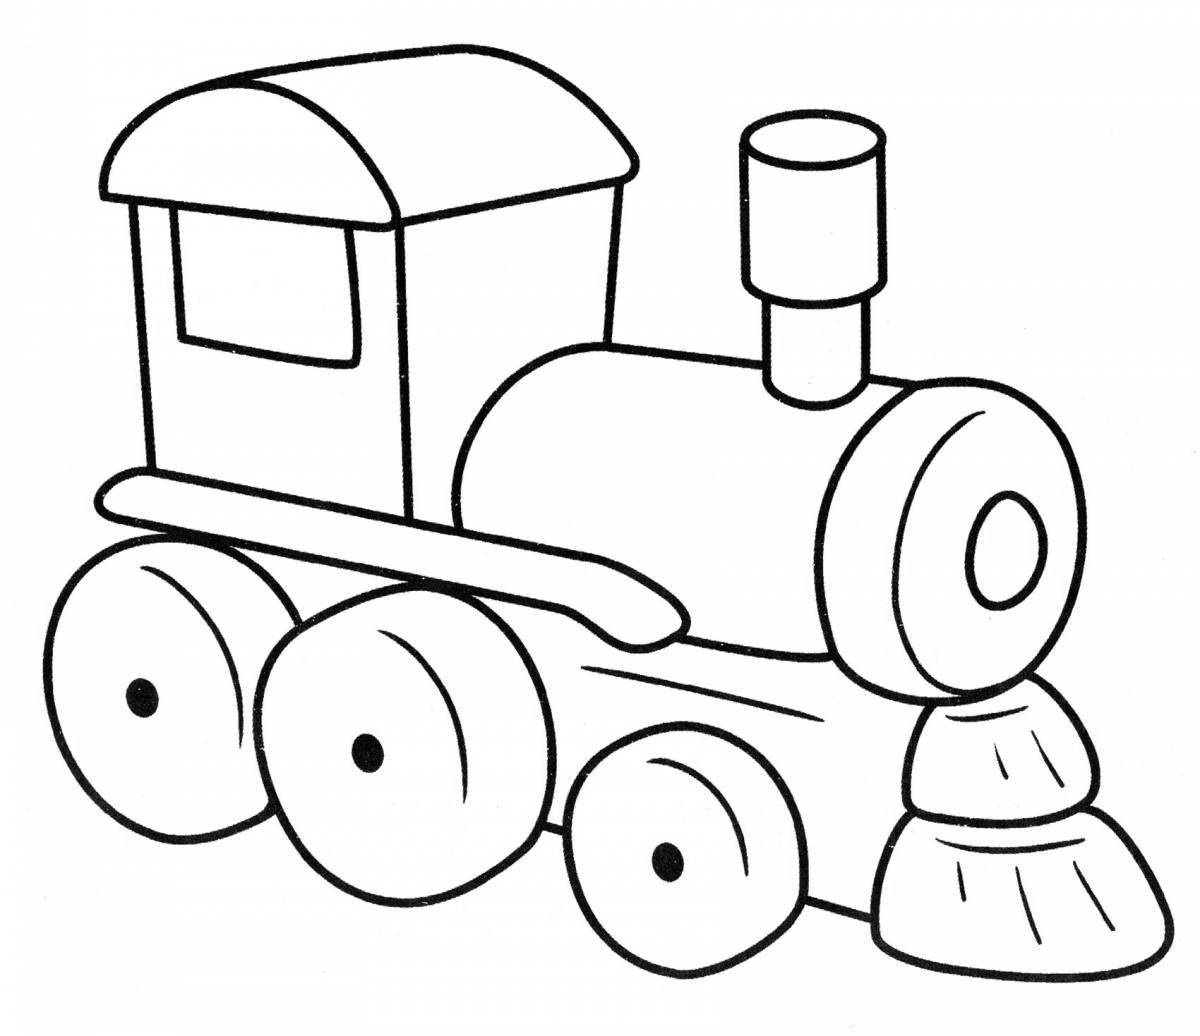 Adorable train coloring book for 3-4 year olds